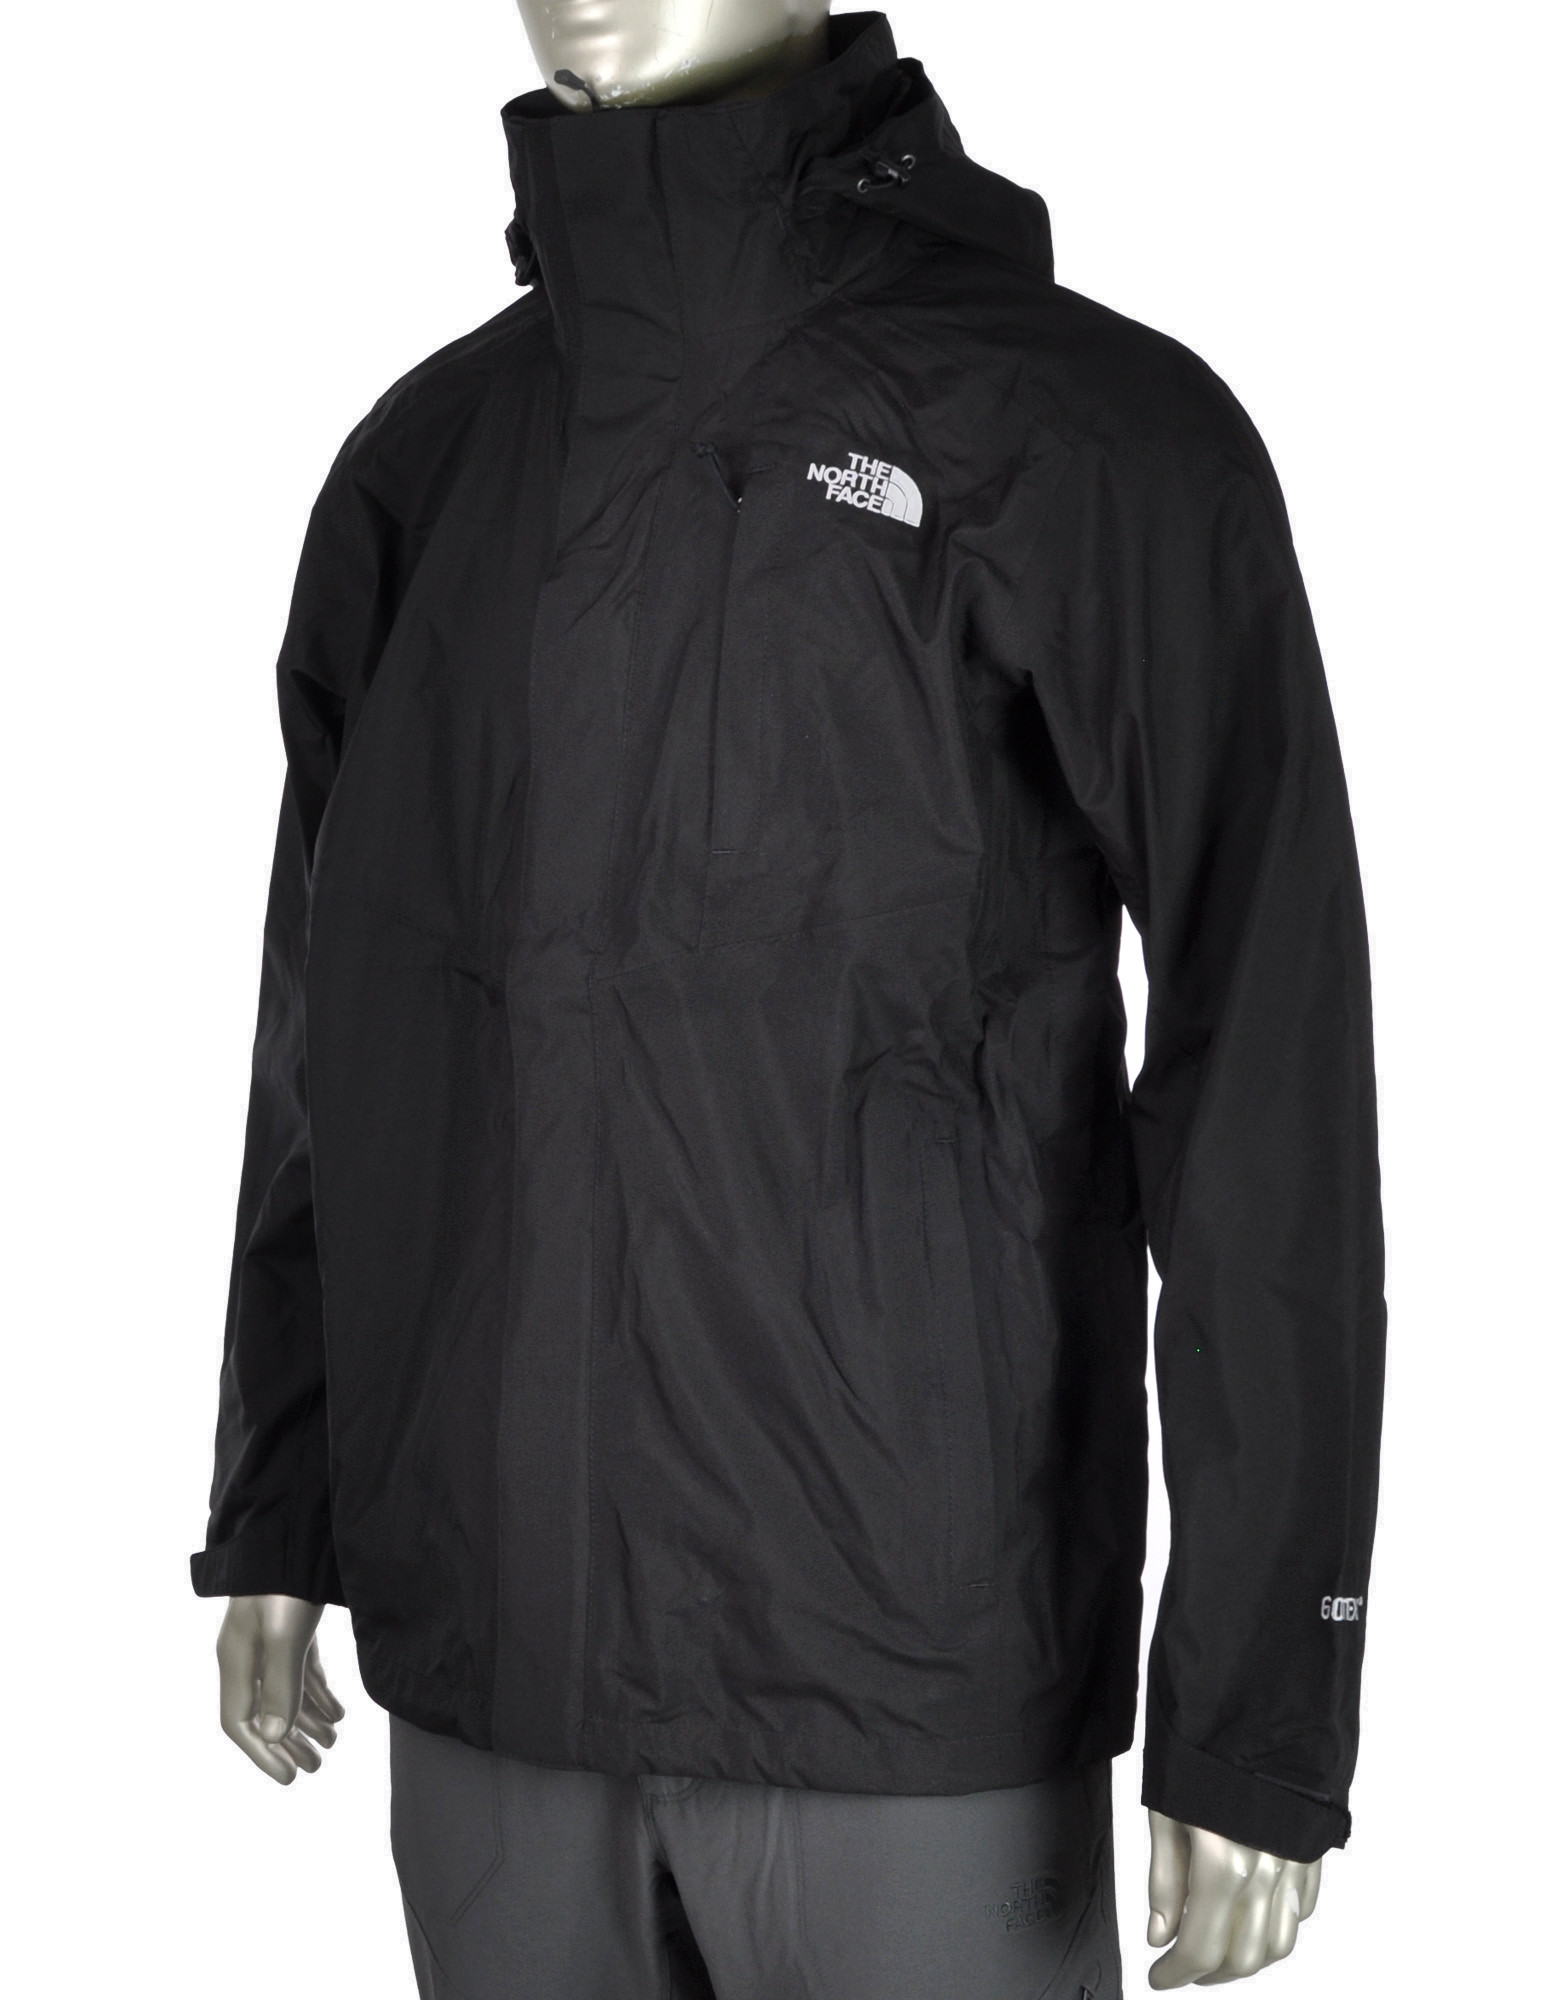 the north face all terrain jacket